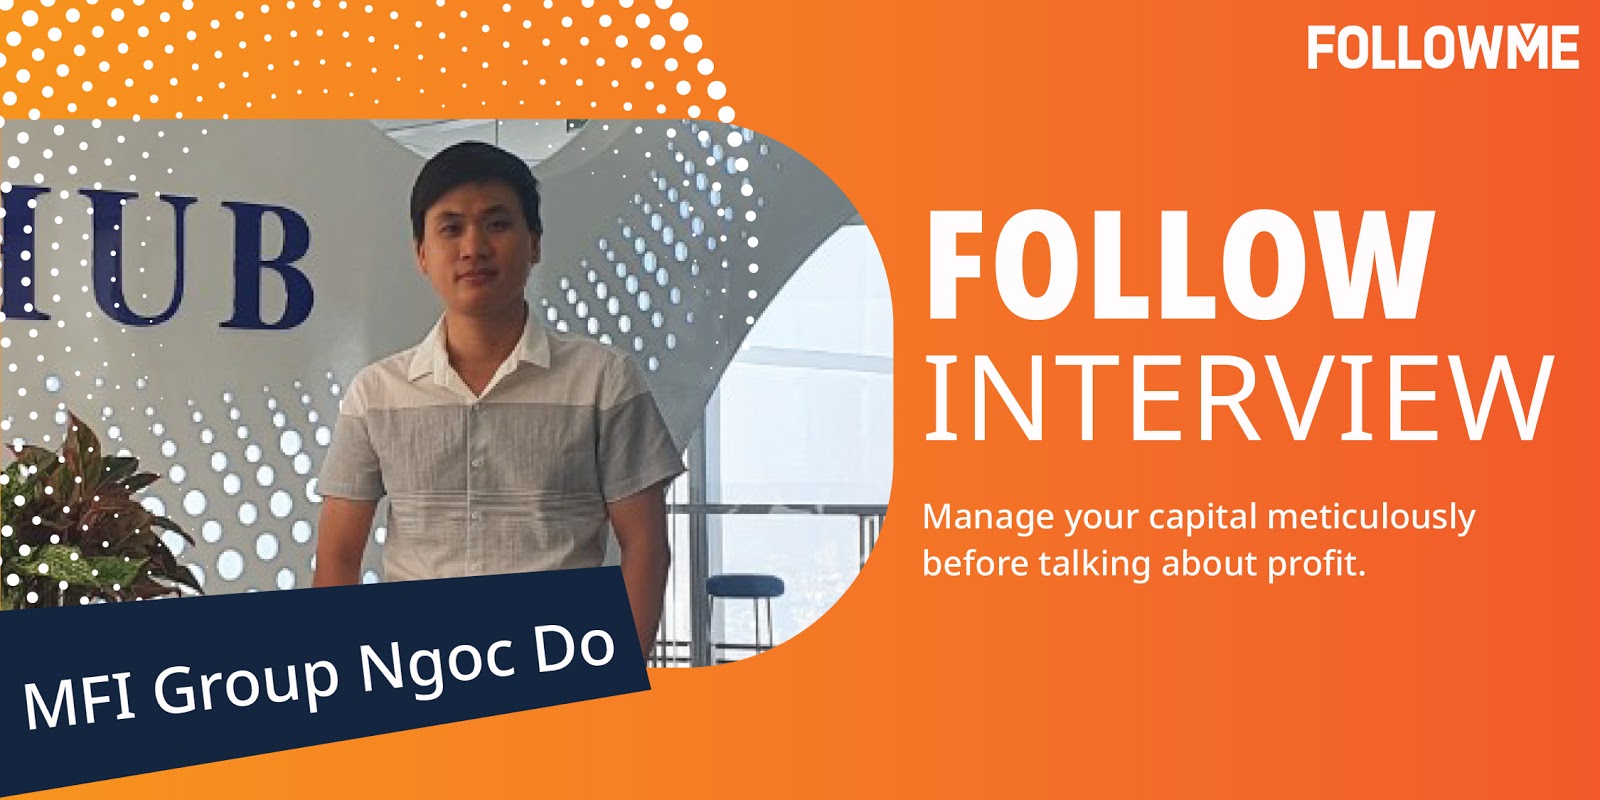 FOLLOWInterview| @MFI GROUP NgocDo - Manage Your Capitals Before Aiming for High Profit